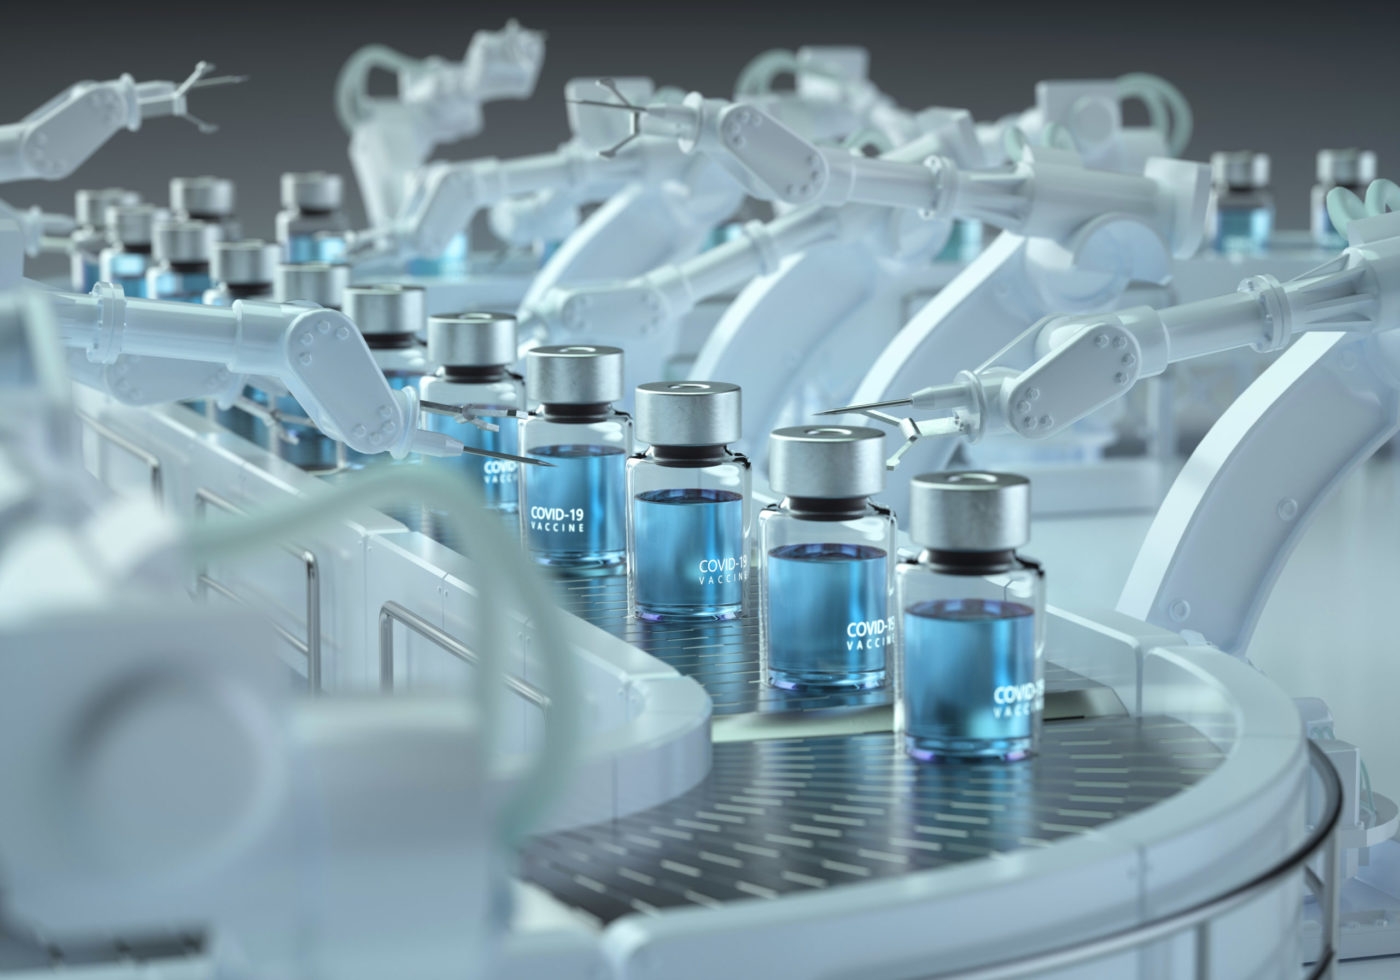 Vingroup to build vaccine factory with annual capacity of 100-200 million doses